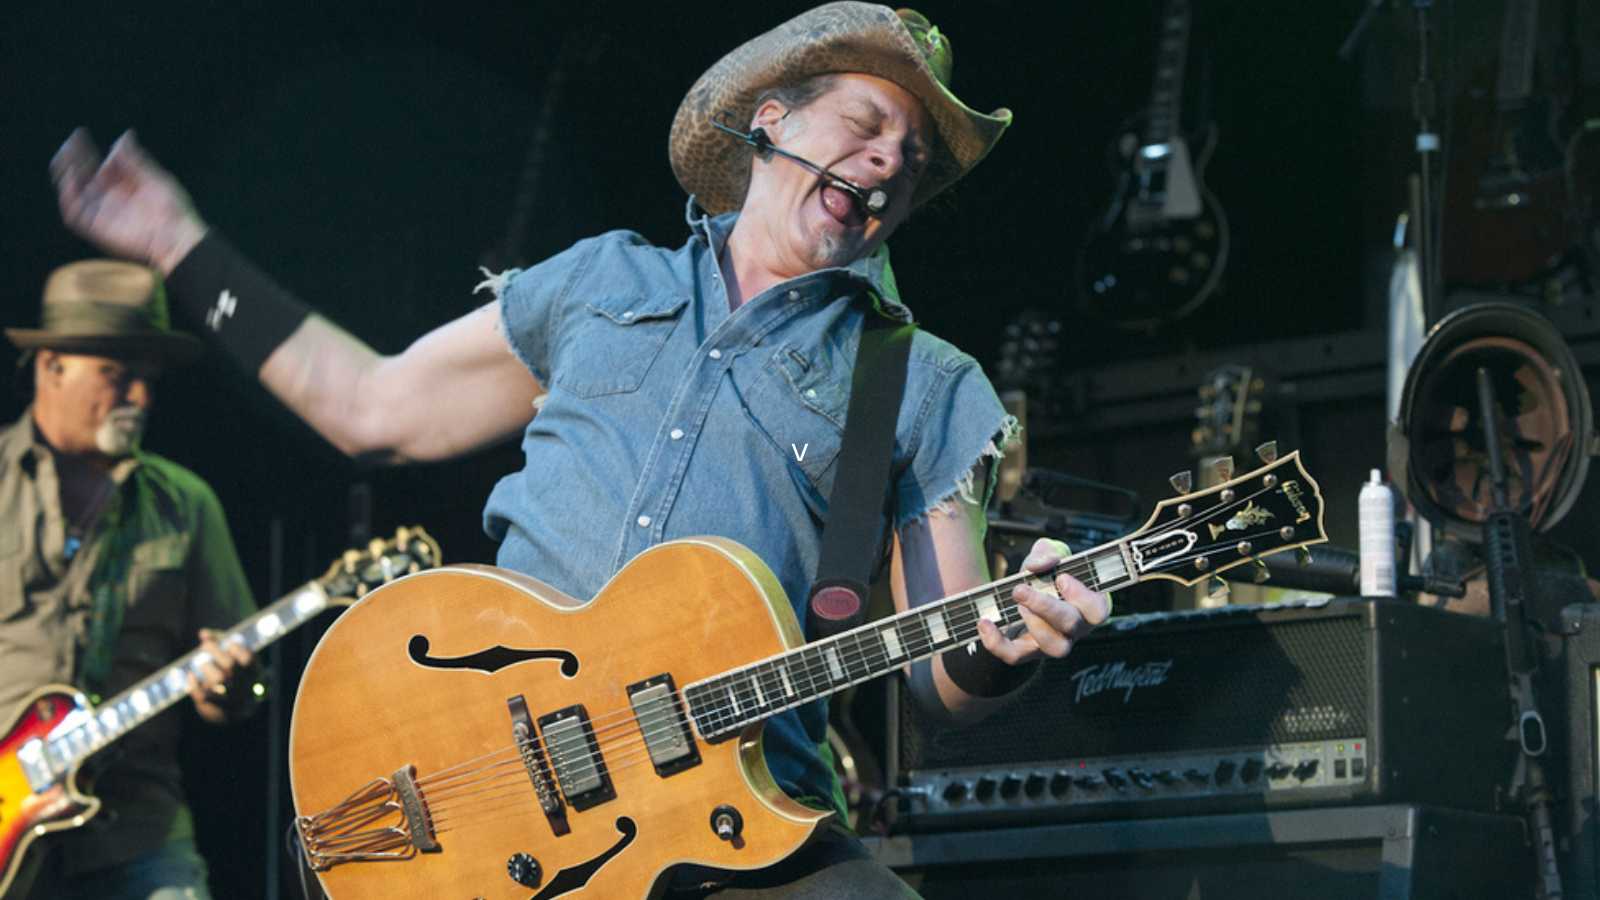 ANAHEIM, CA - JUNE 30: Ted Nugent strikes a chord to a sold out show at the Grove Theatre in Anaheim, CA on June 30, 2011.
